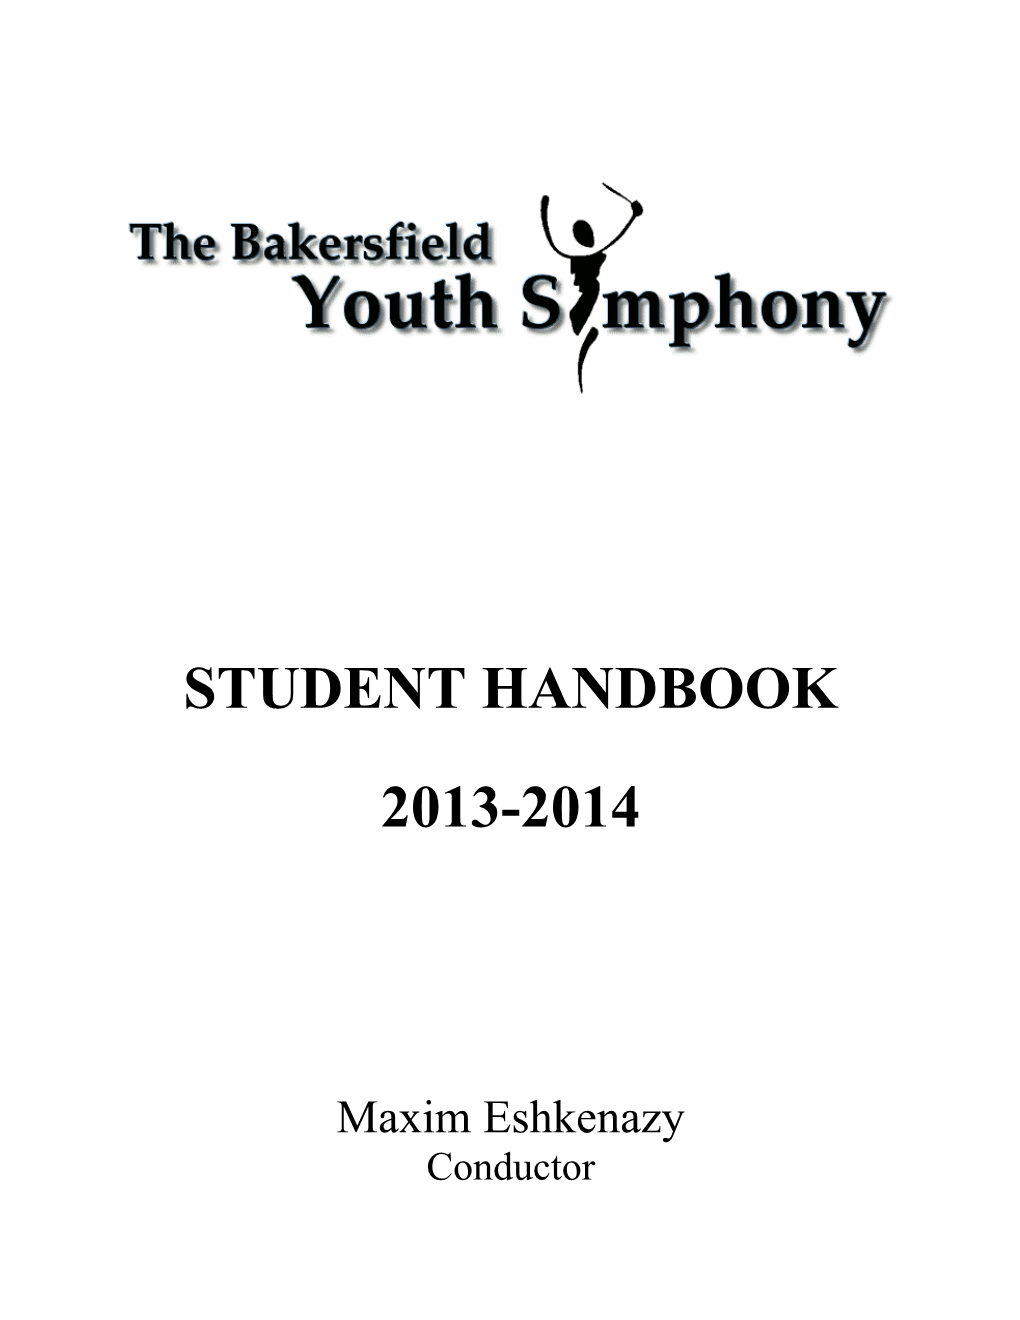 The Bakersfield Youth Symphony